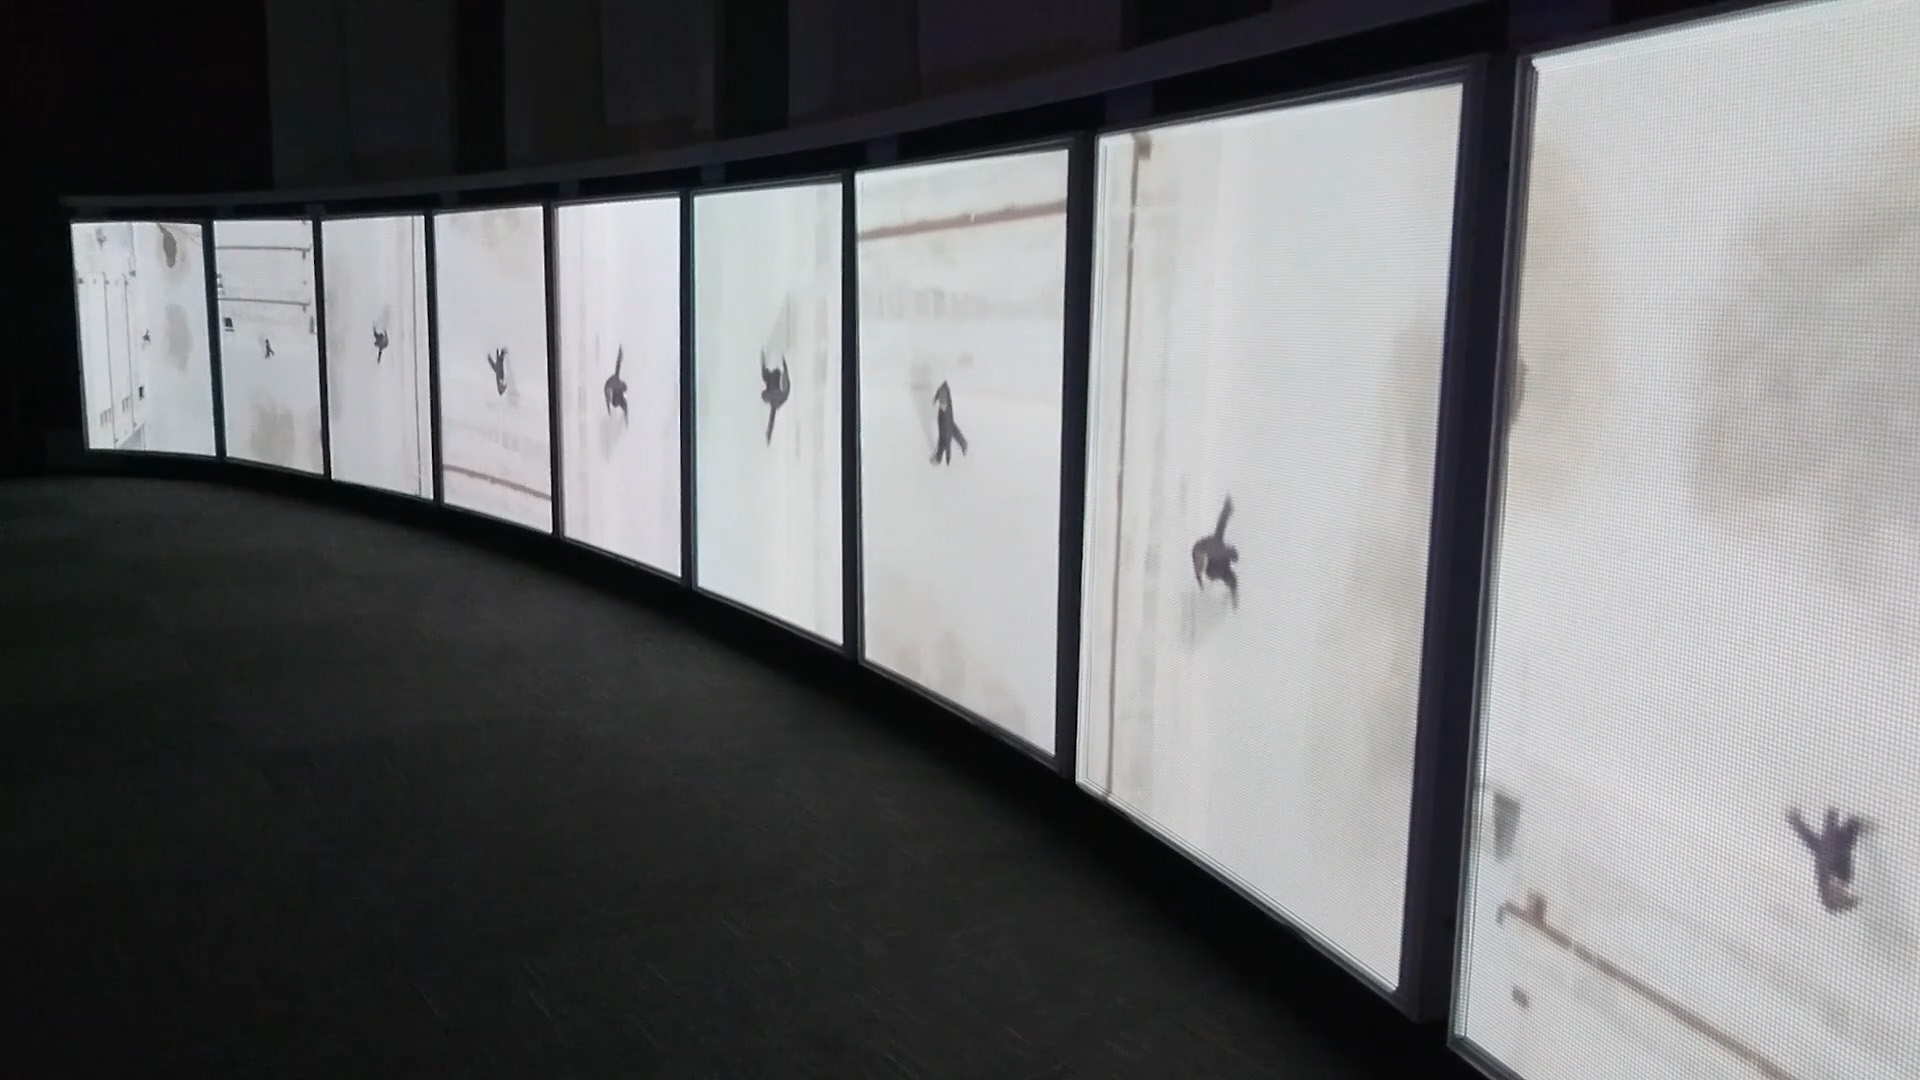 Perimeter_projection_mapping_video_installation